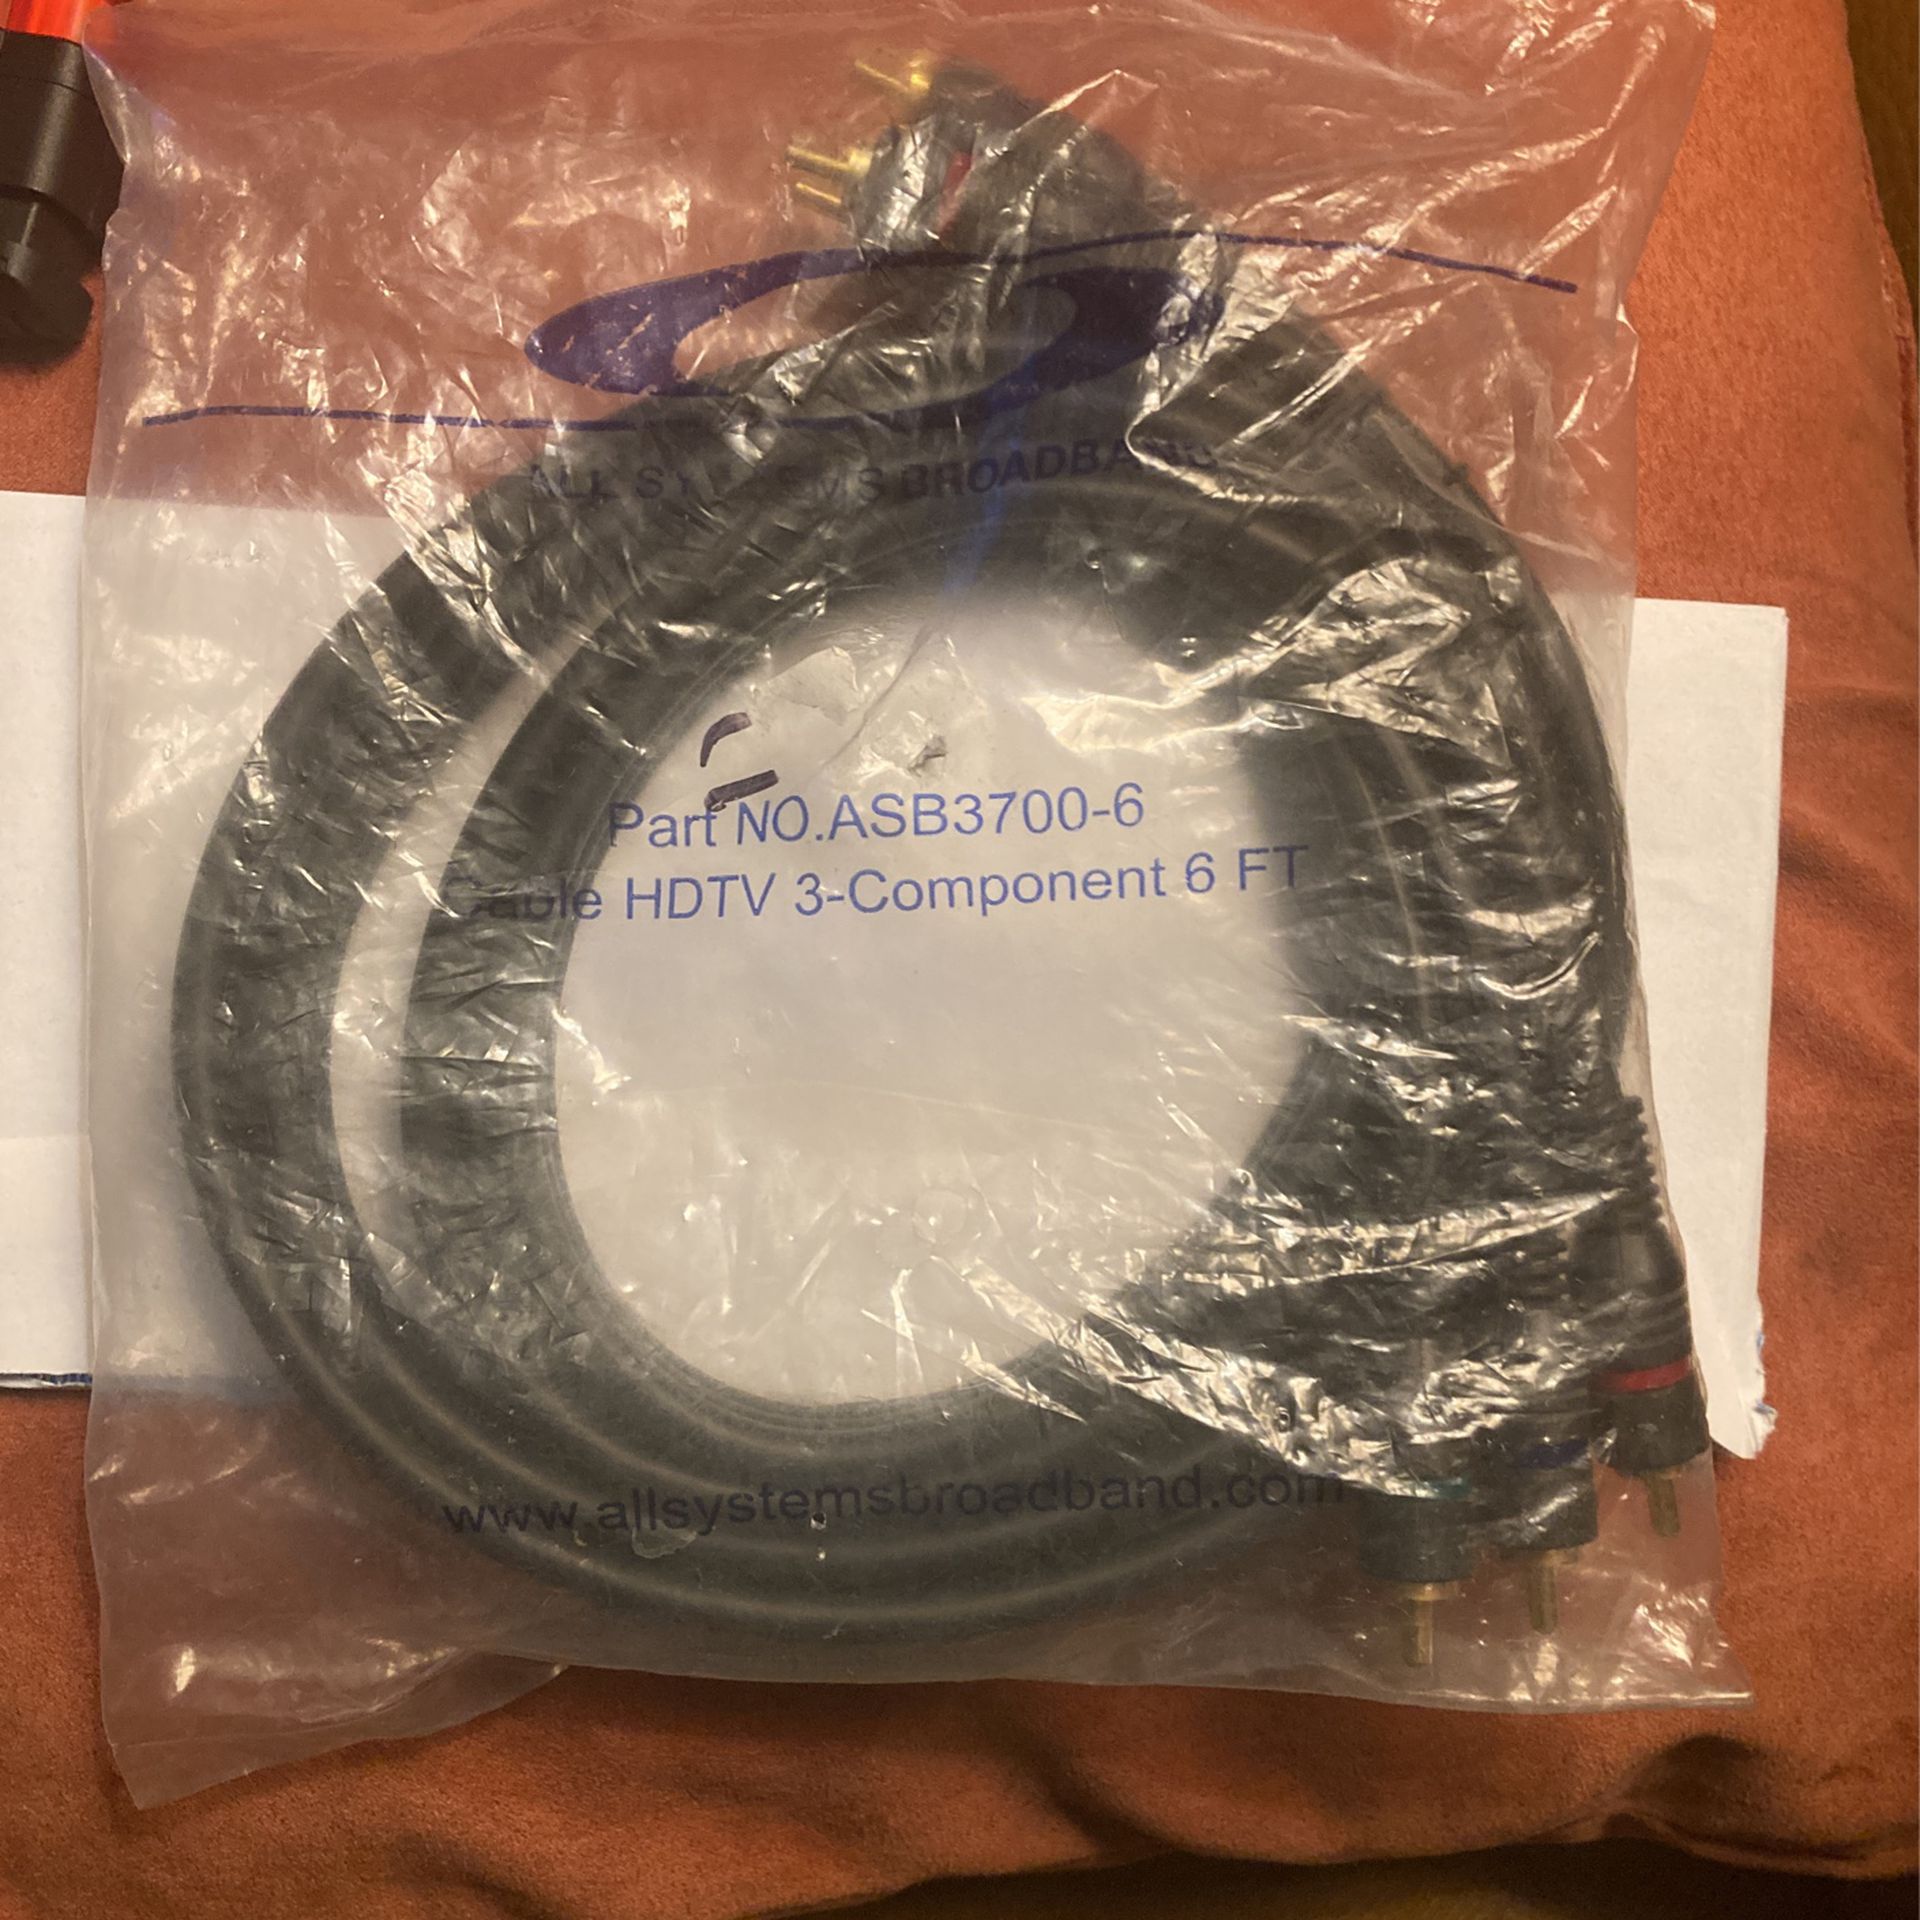 6 Ft Cable HDTV 3-component 